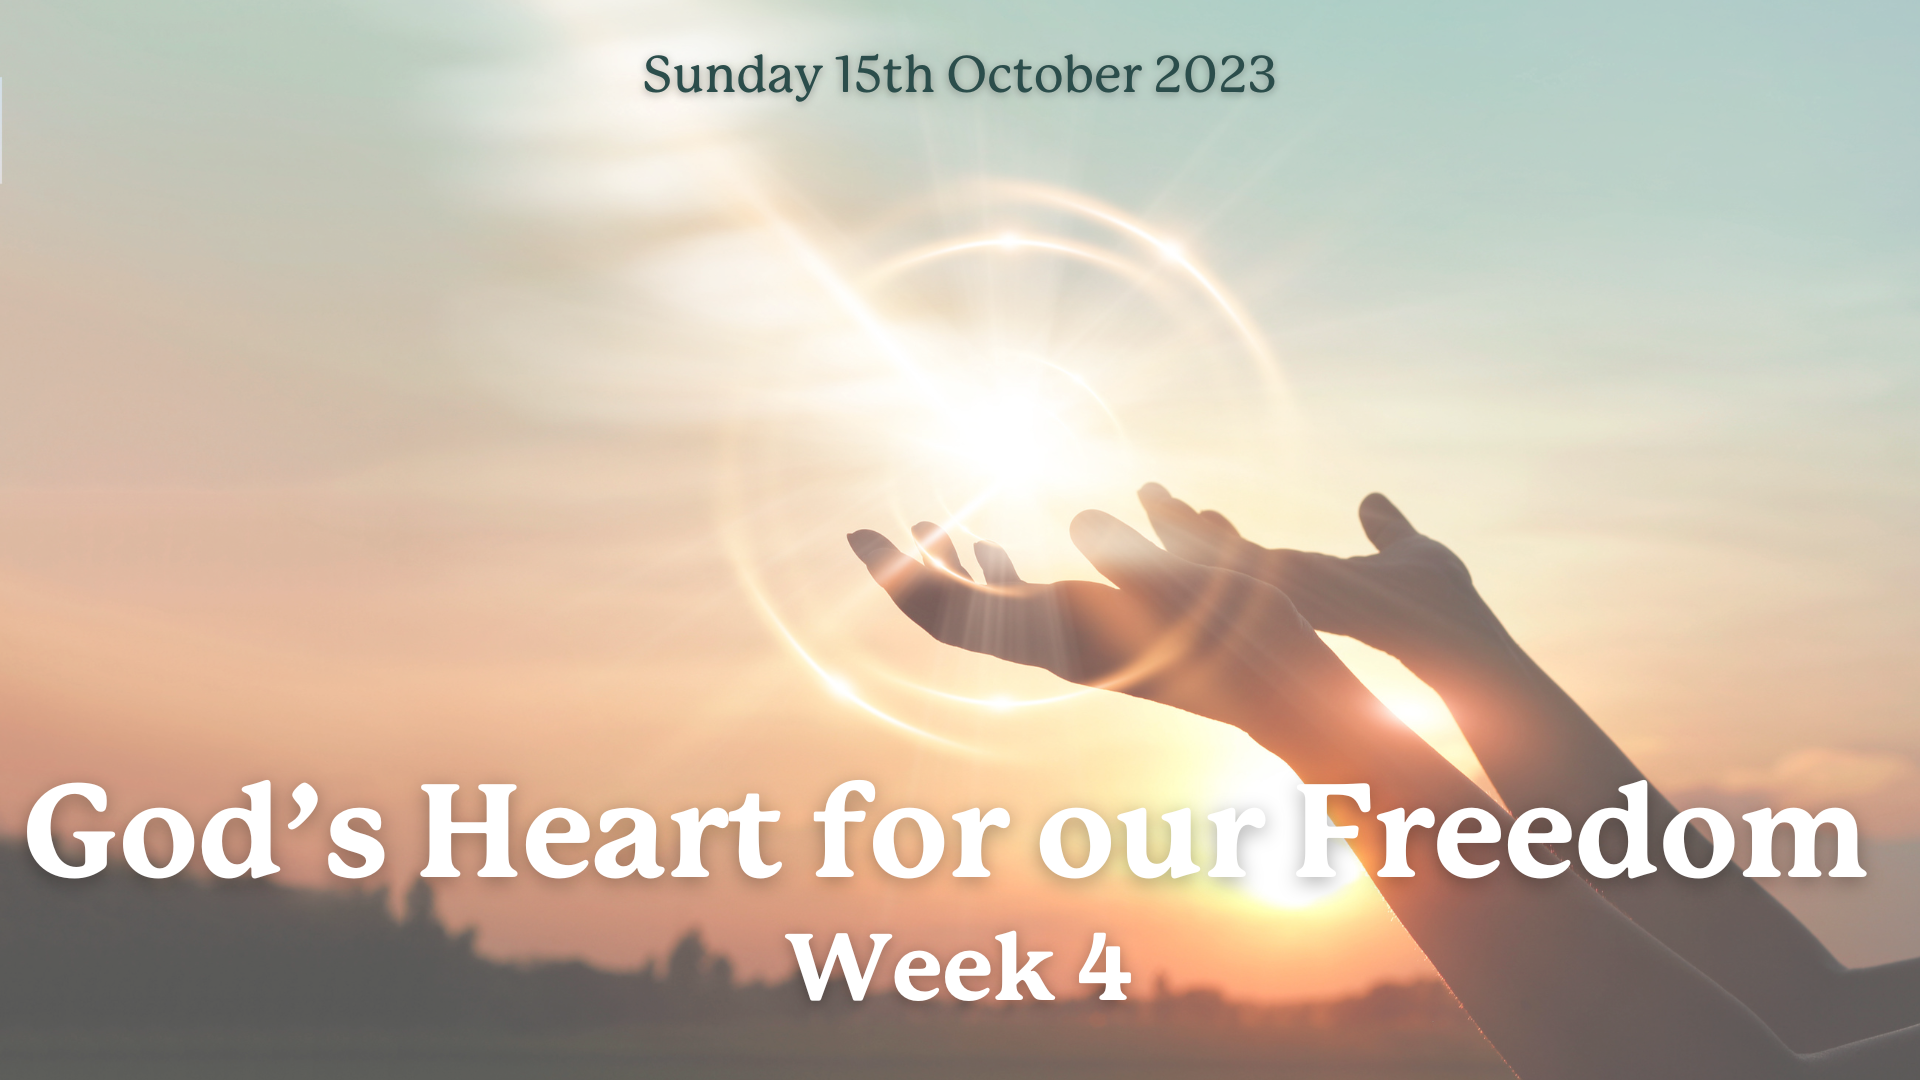 Sunday Service - God's Heart for your Freedom - Week 4